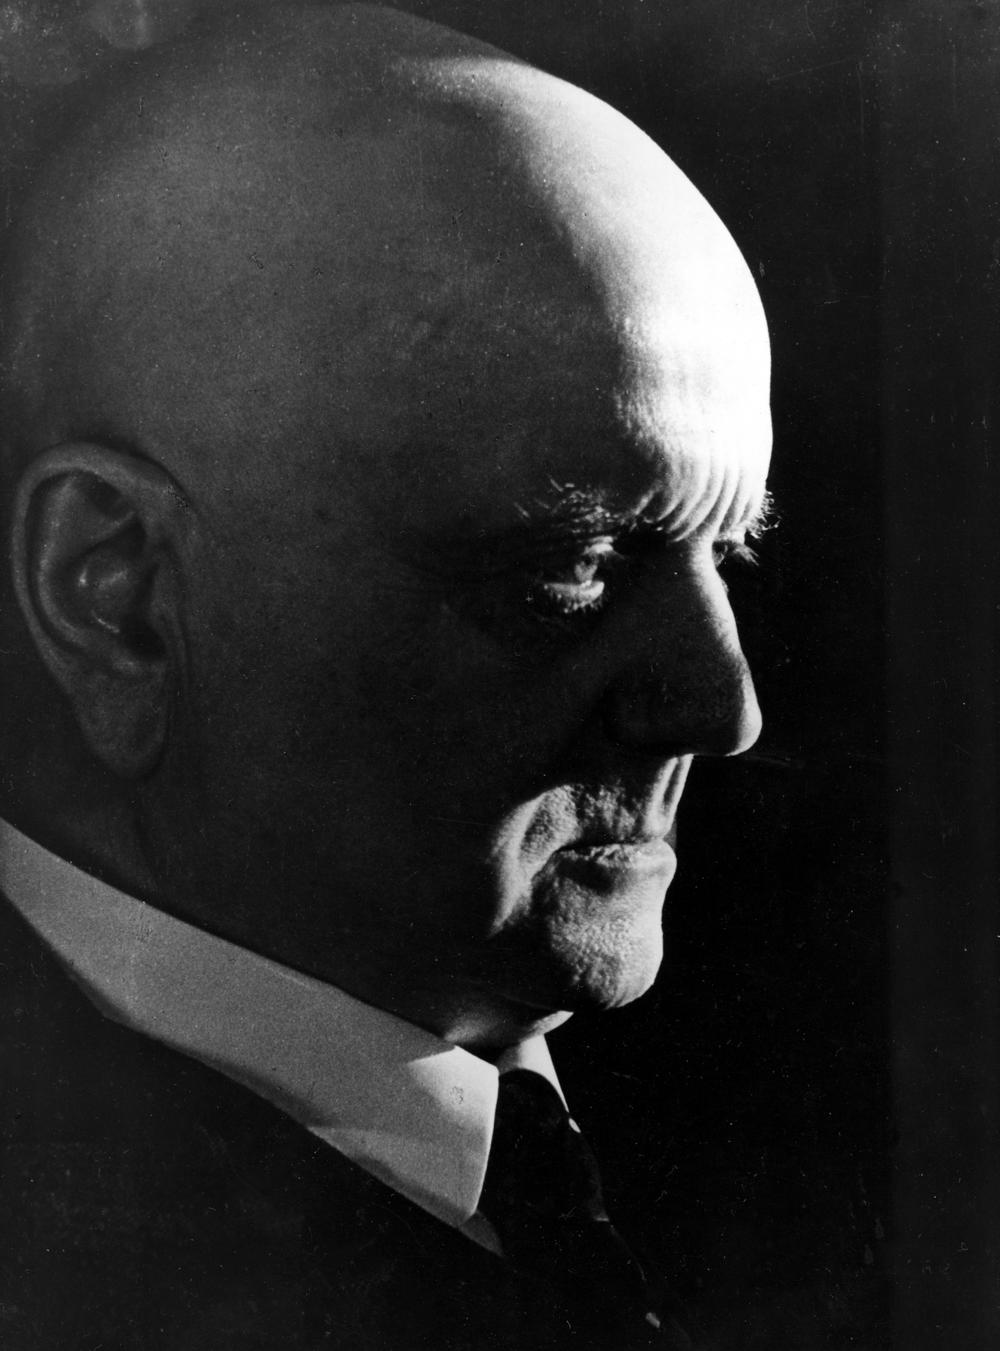 Finnish composer Jean Sibelius, born Johan Julius Christian Sibelius, is shown here in Finland in Jan. 1938. His symphonic poem "Finlandia" helped galvanize Finland's fighting spirit in its struggle for independence from Russia.